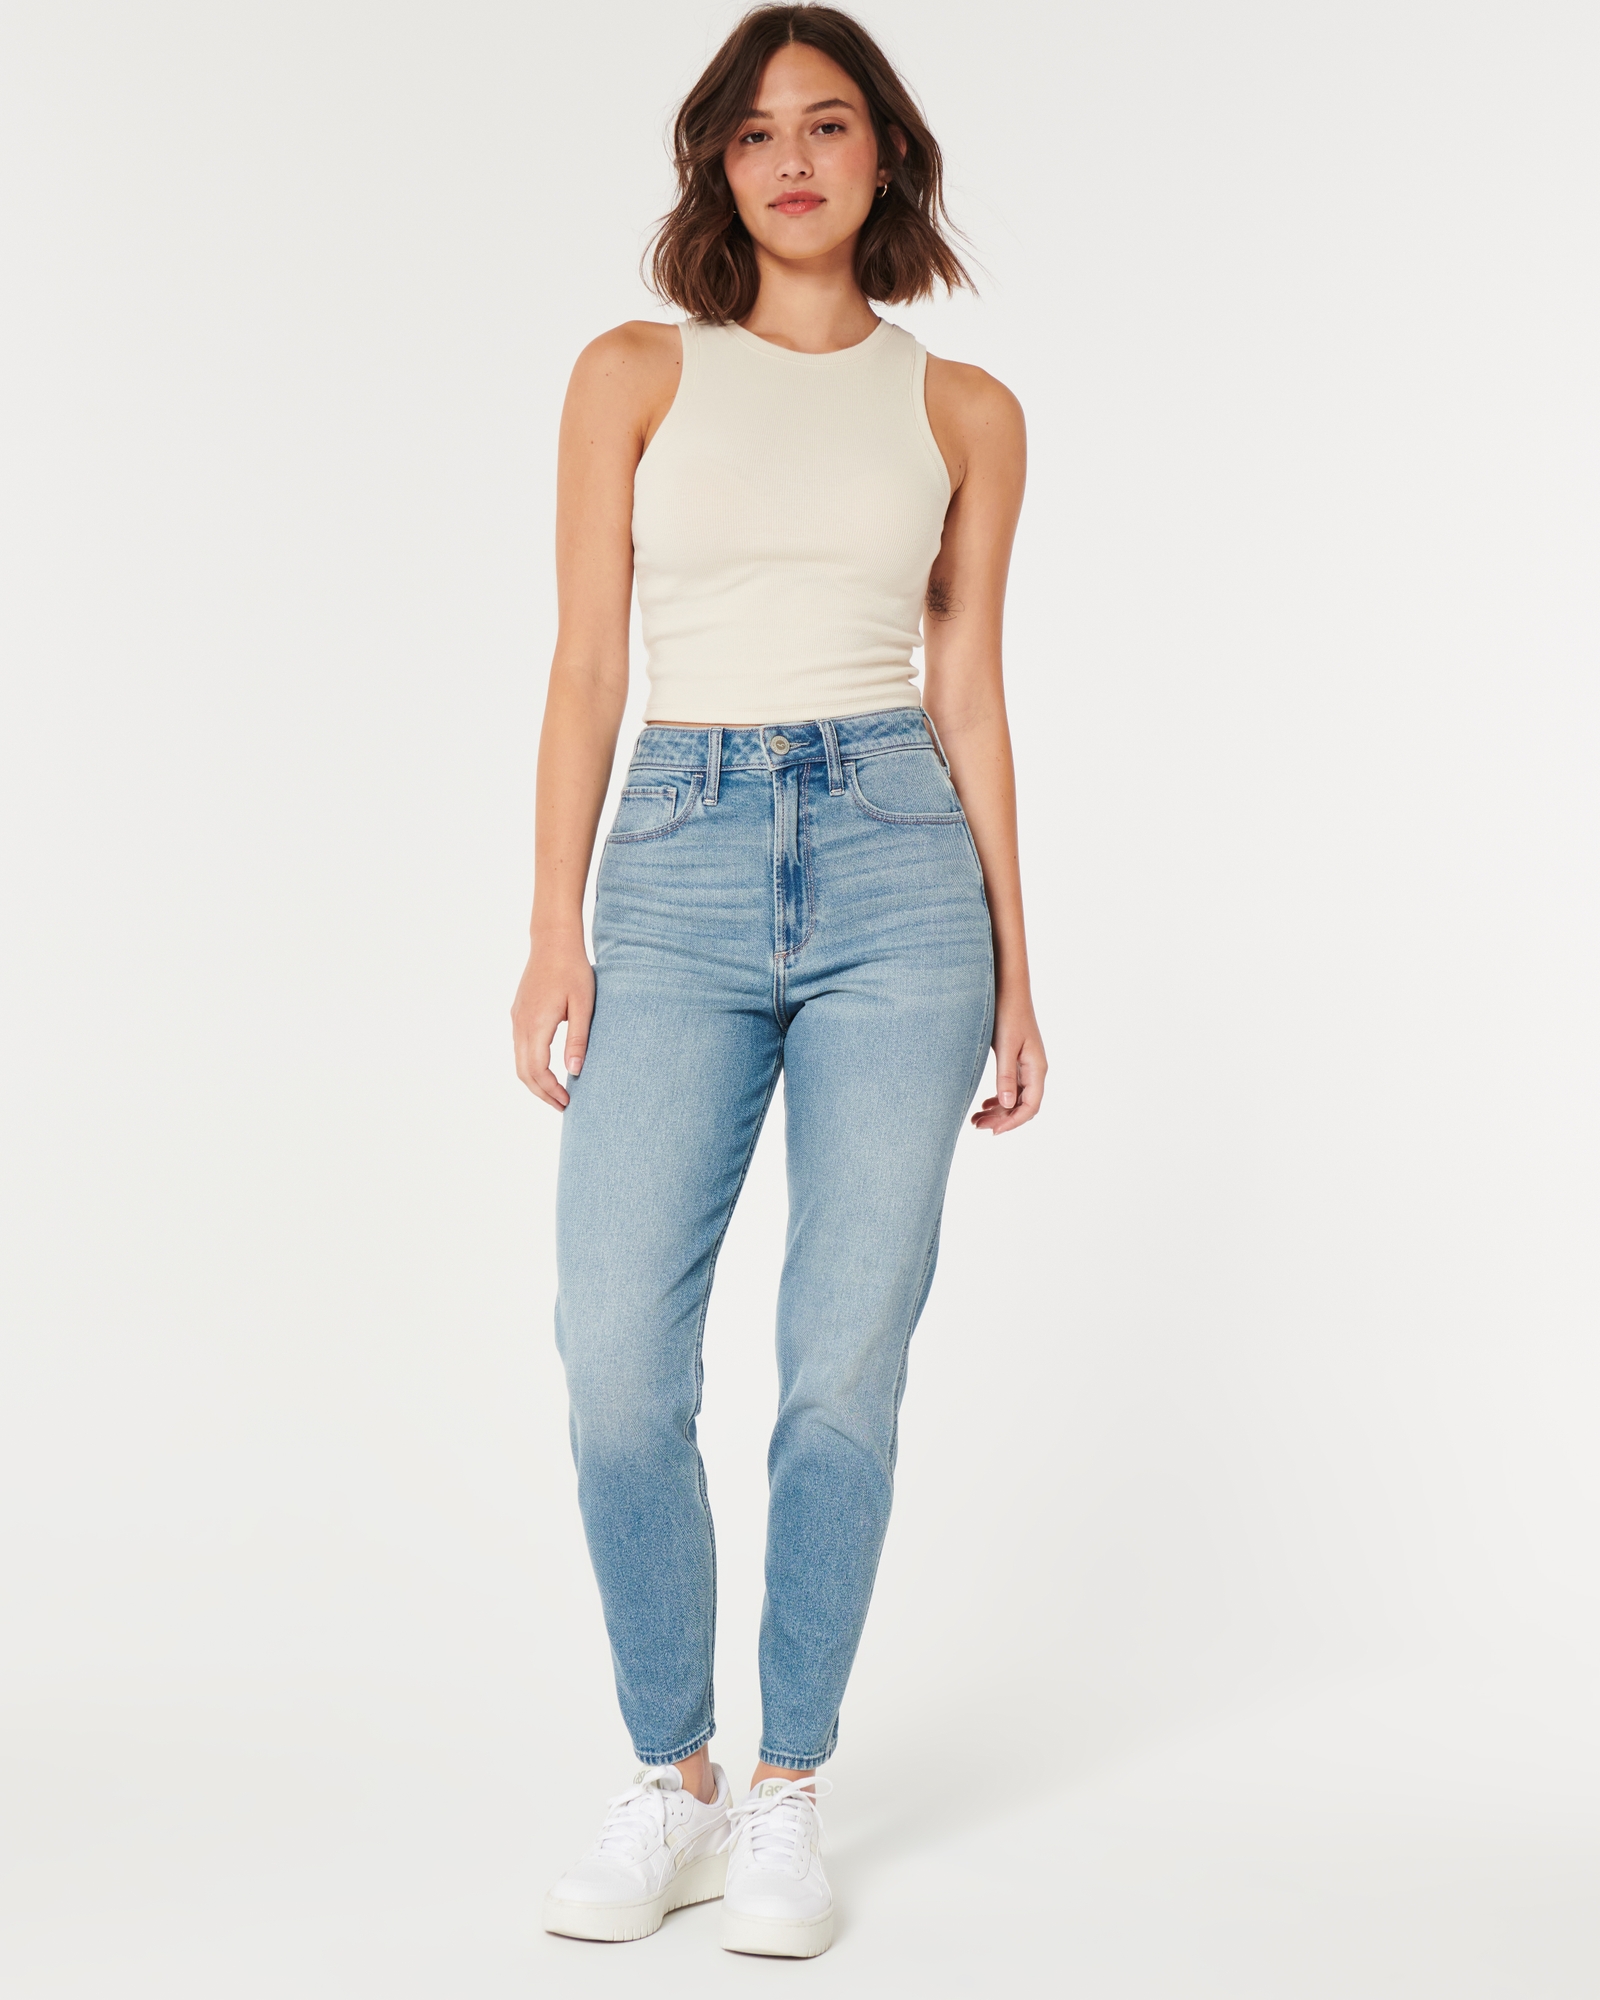 Women's Curvy Jeans, Mom, High & Low-Rise